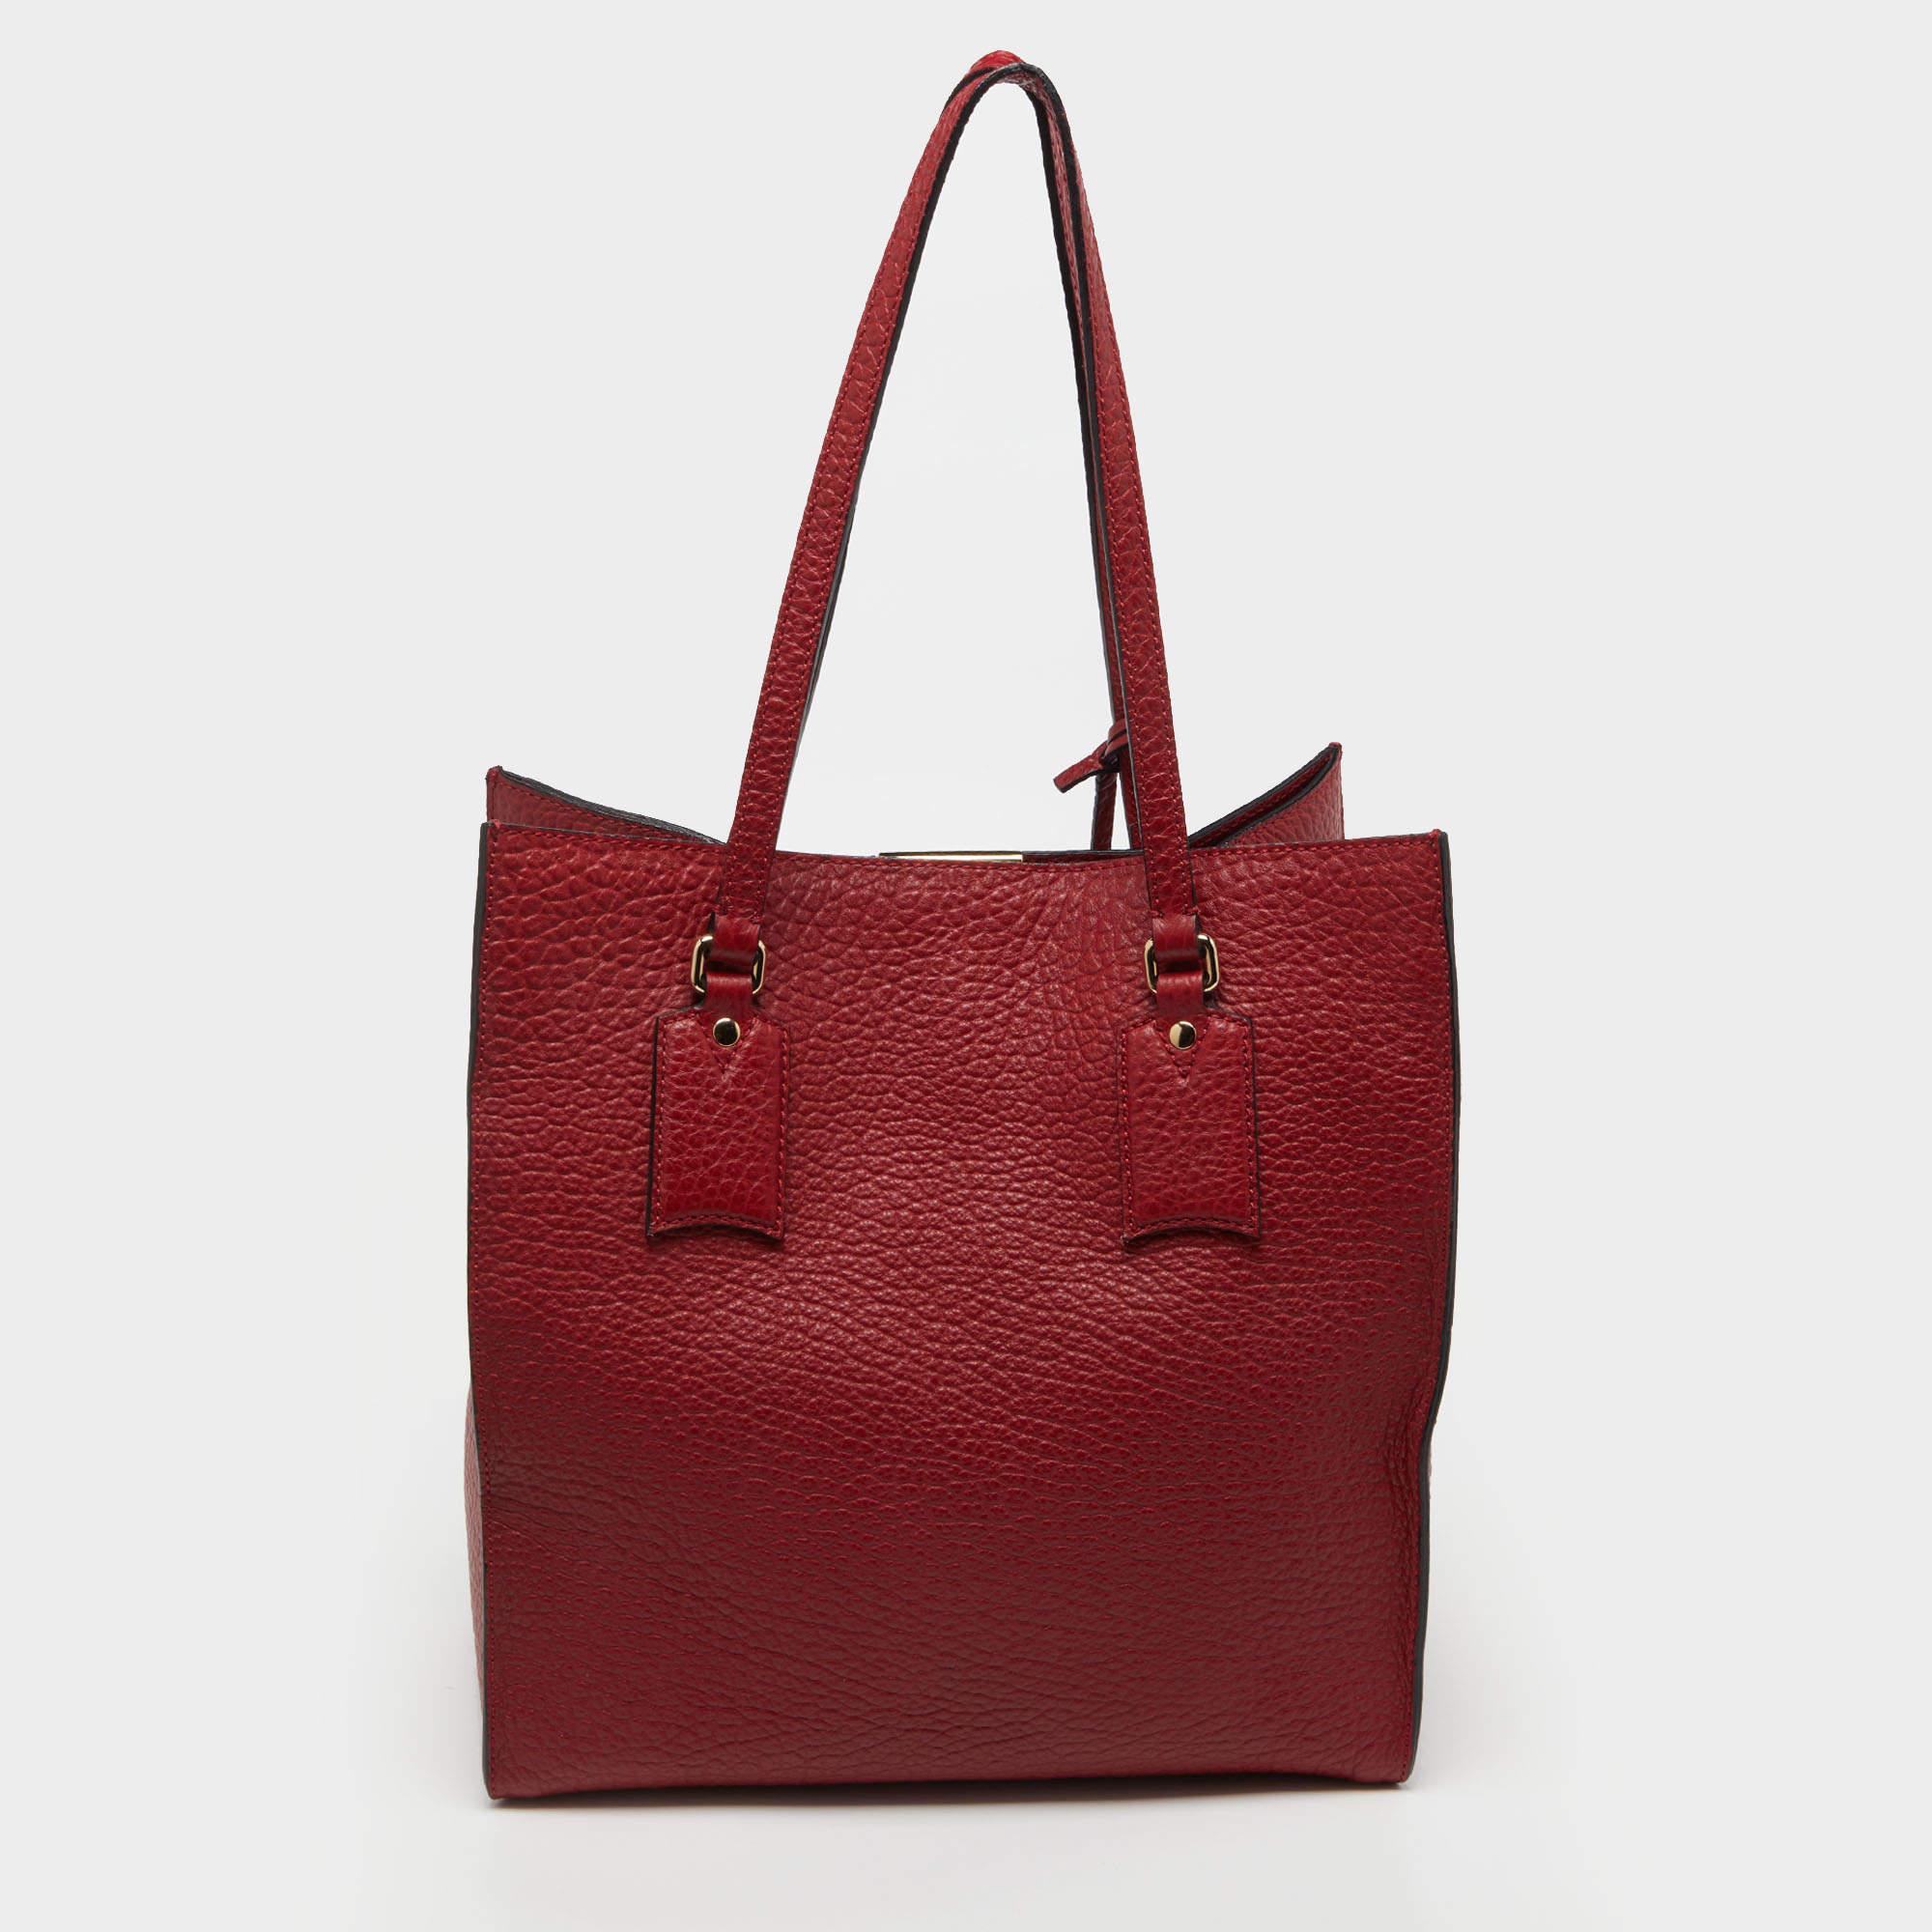 Indulge in timeless luxury with this Burberry red bag. Meticulously handcrafted, this iconic piece combines heritage, elegance, and craftsmanship, elevating your style to a level of unmatched sophistication.

